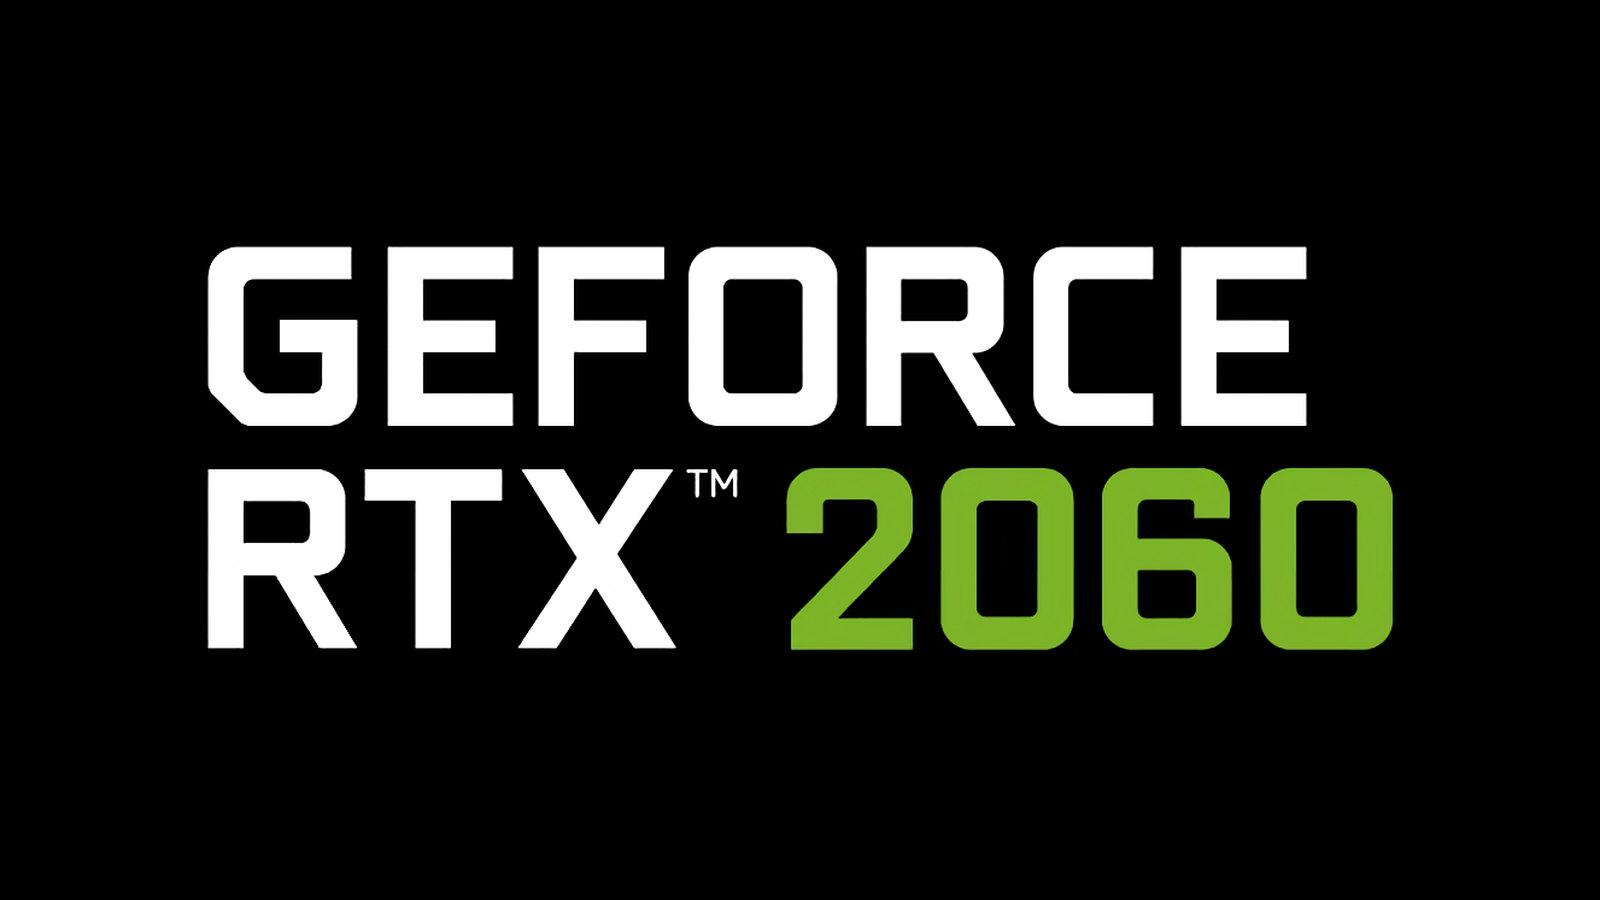 Complete GeForce RTX 2060 parameters. It costs $ 349